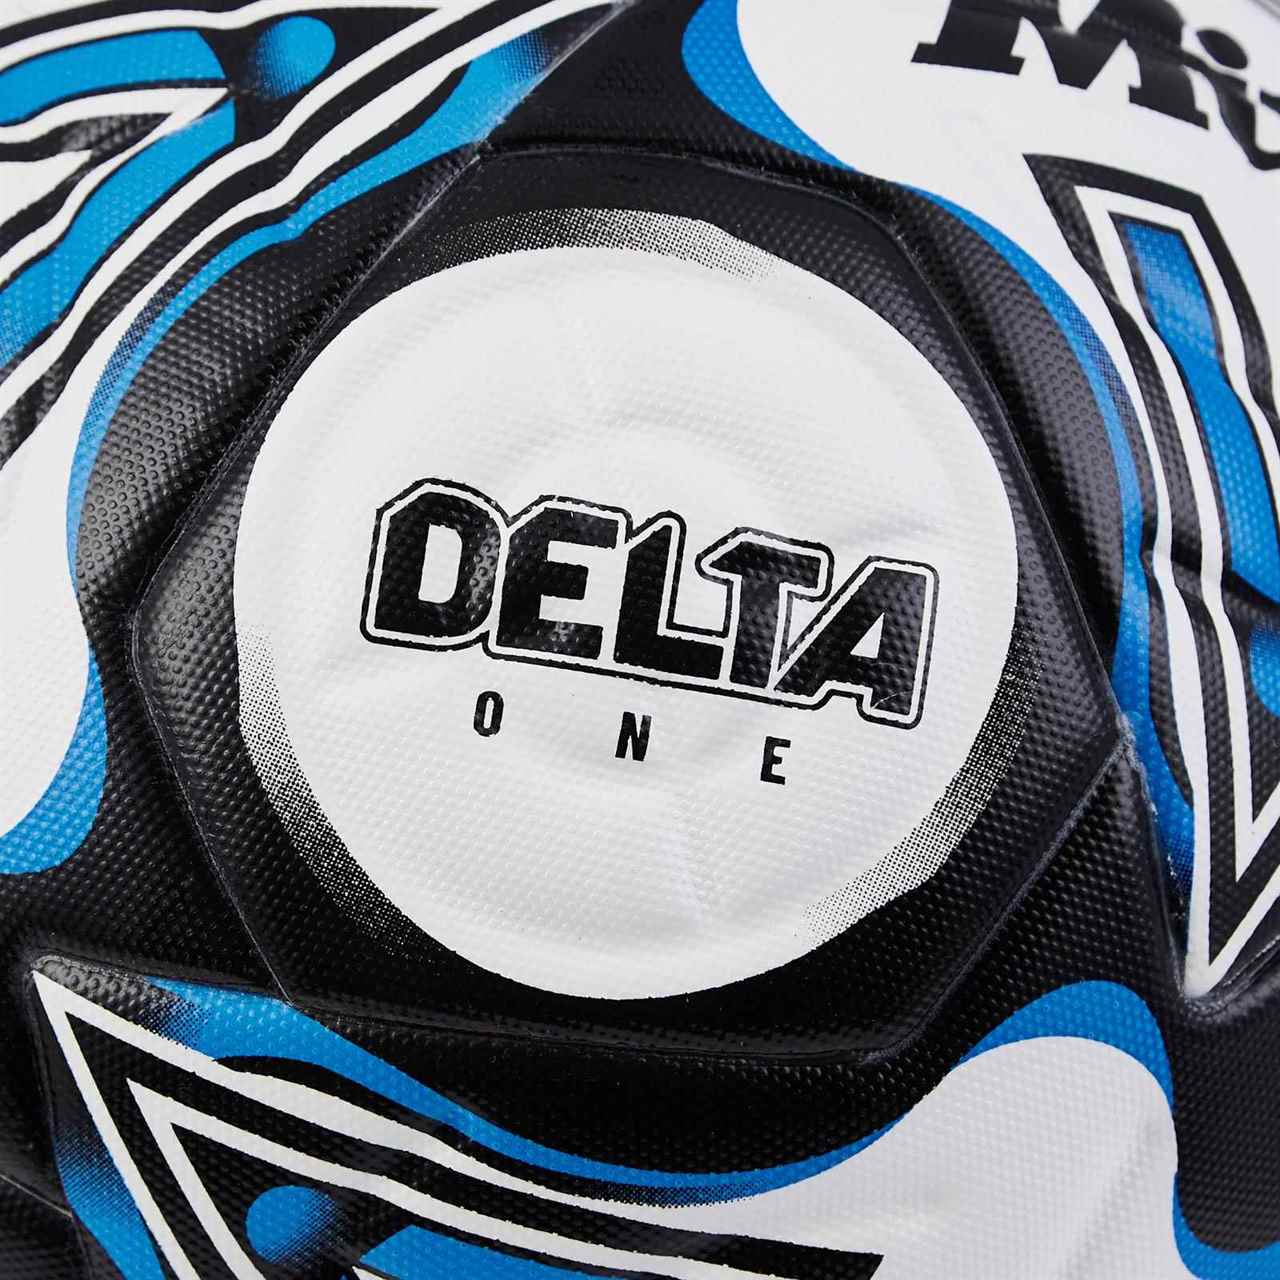 MITRE DELTA ONE 24 FOOTBALL - SIZE 5